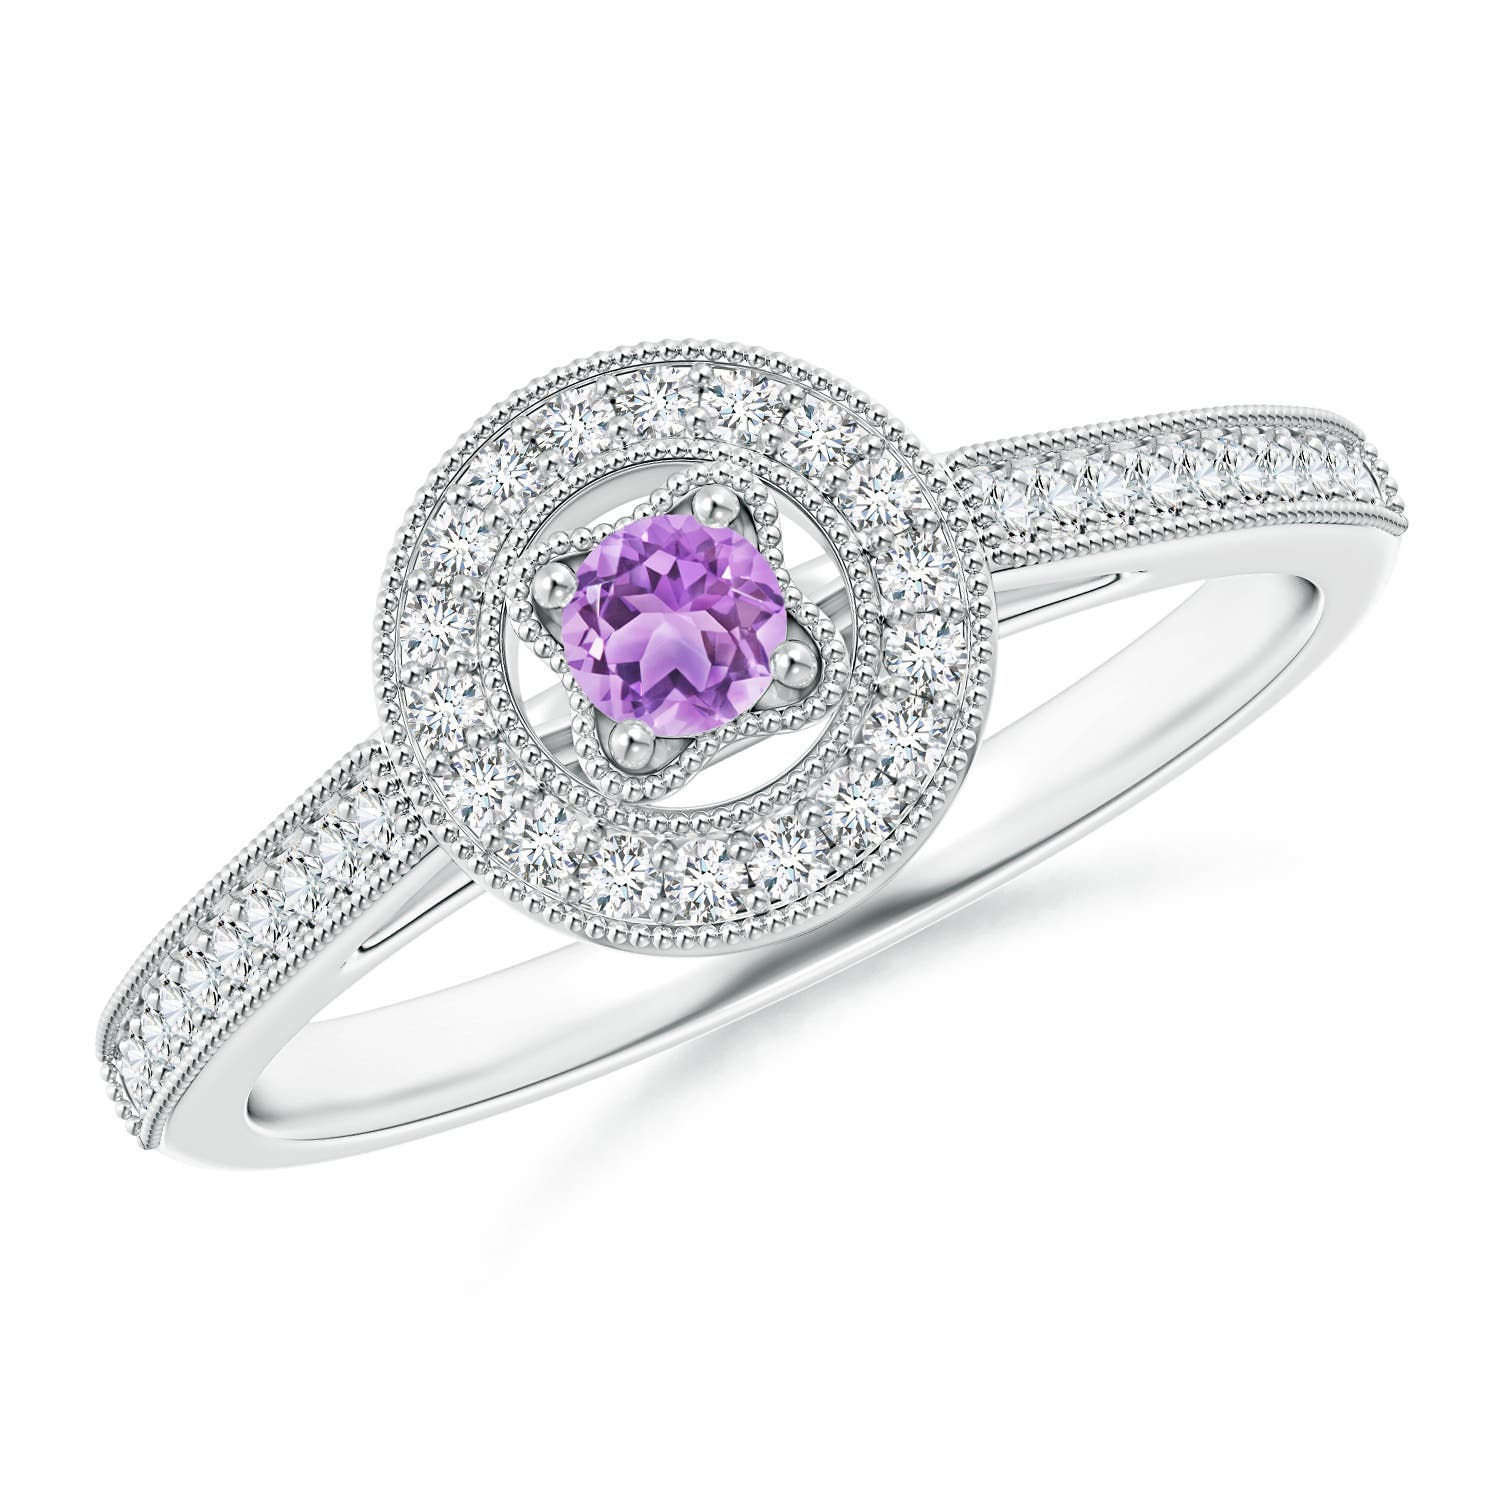 AAA - Amethyst / 0.31 CT / 14 KT White Gold